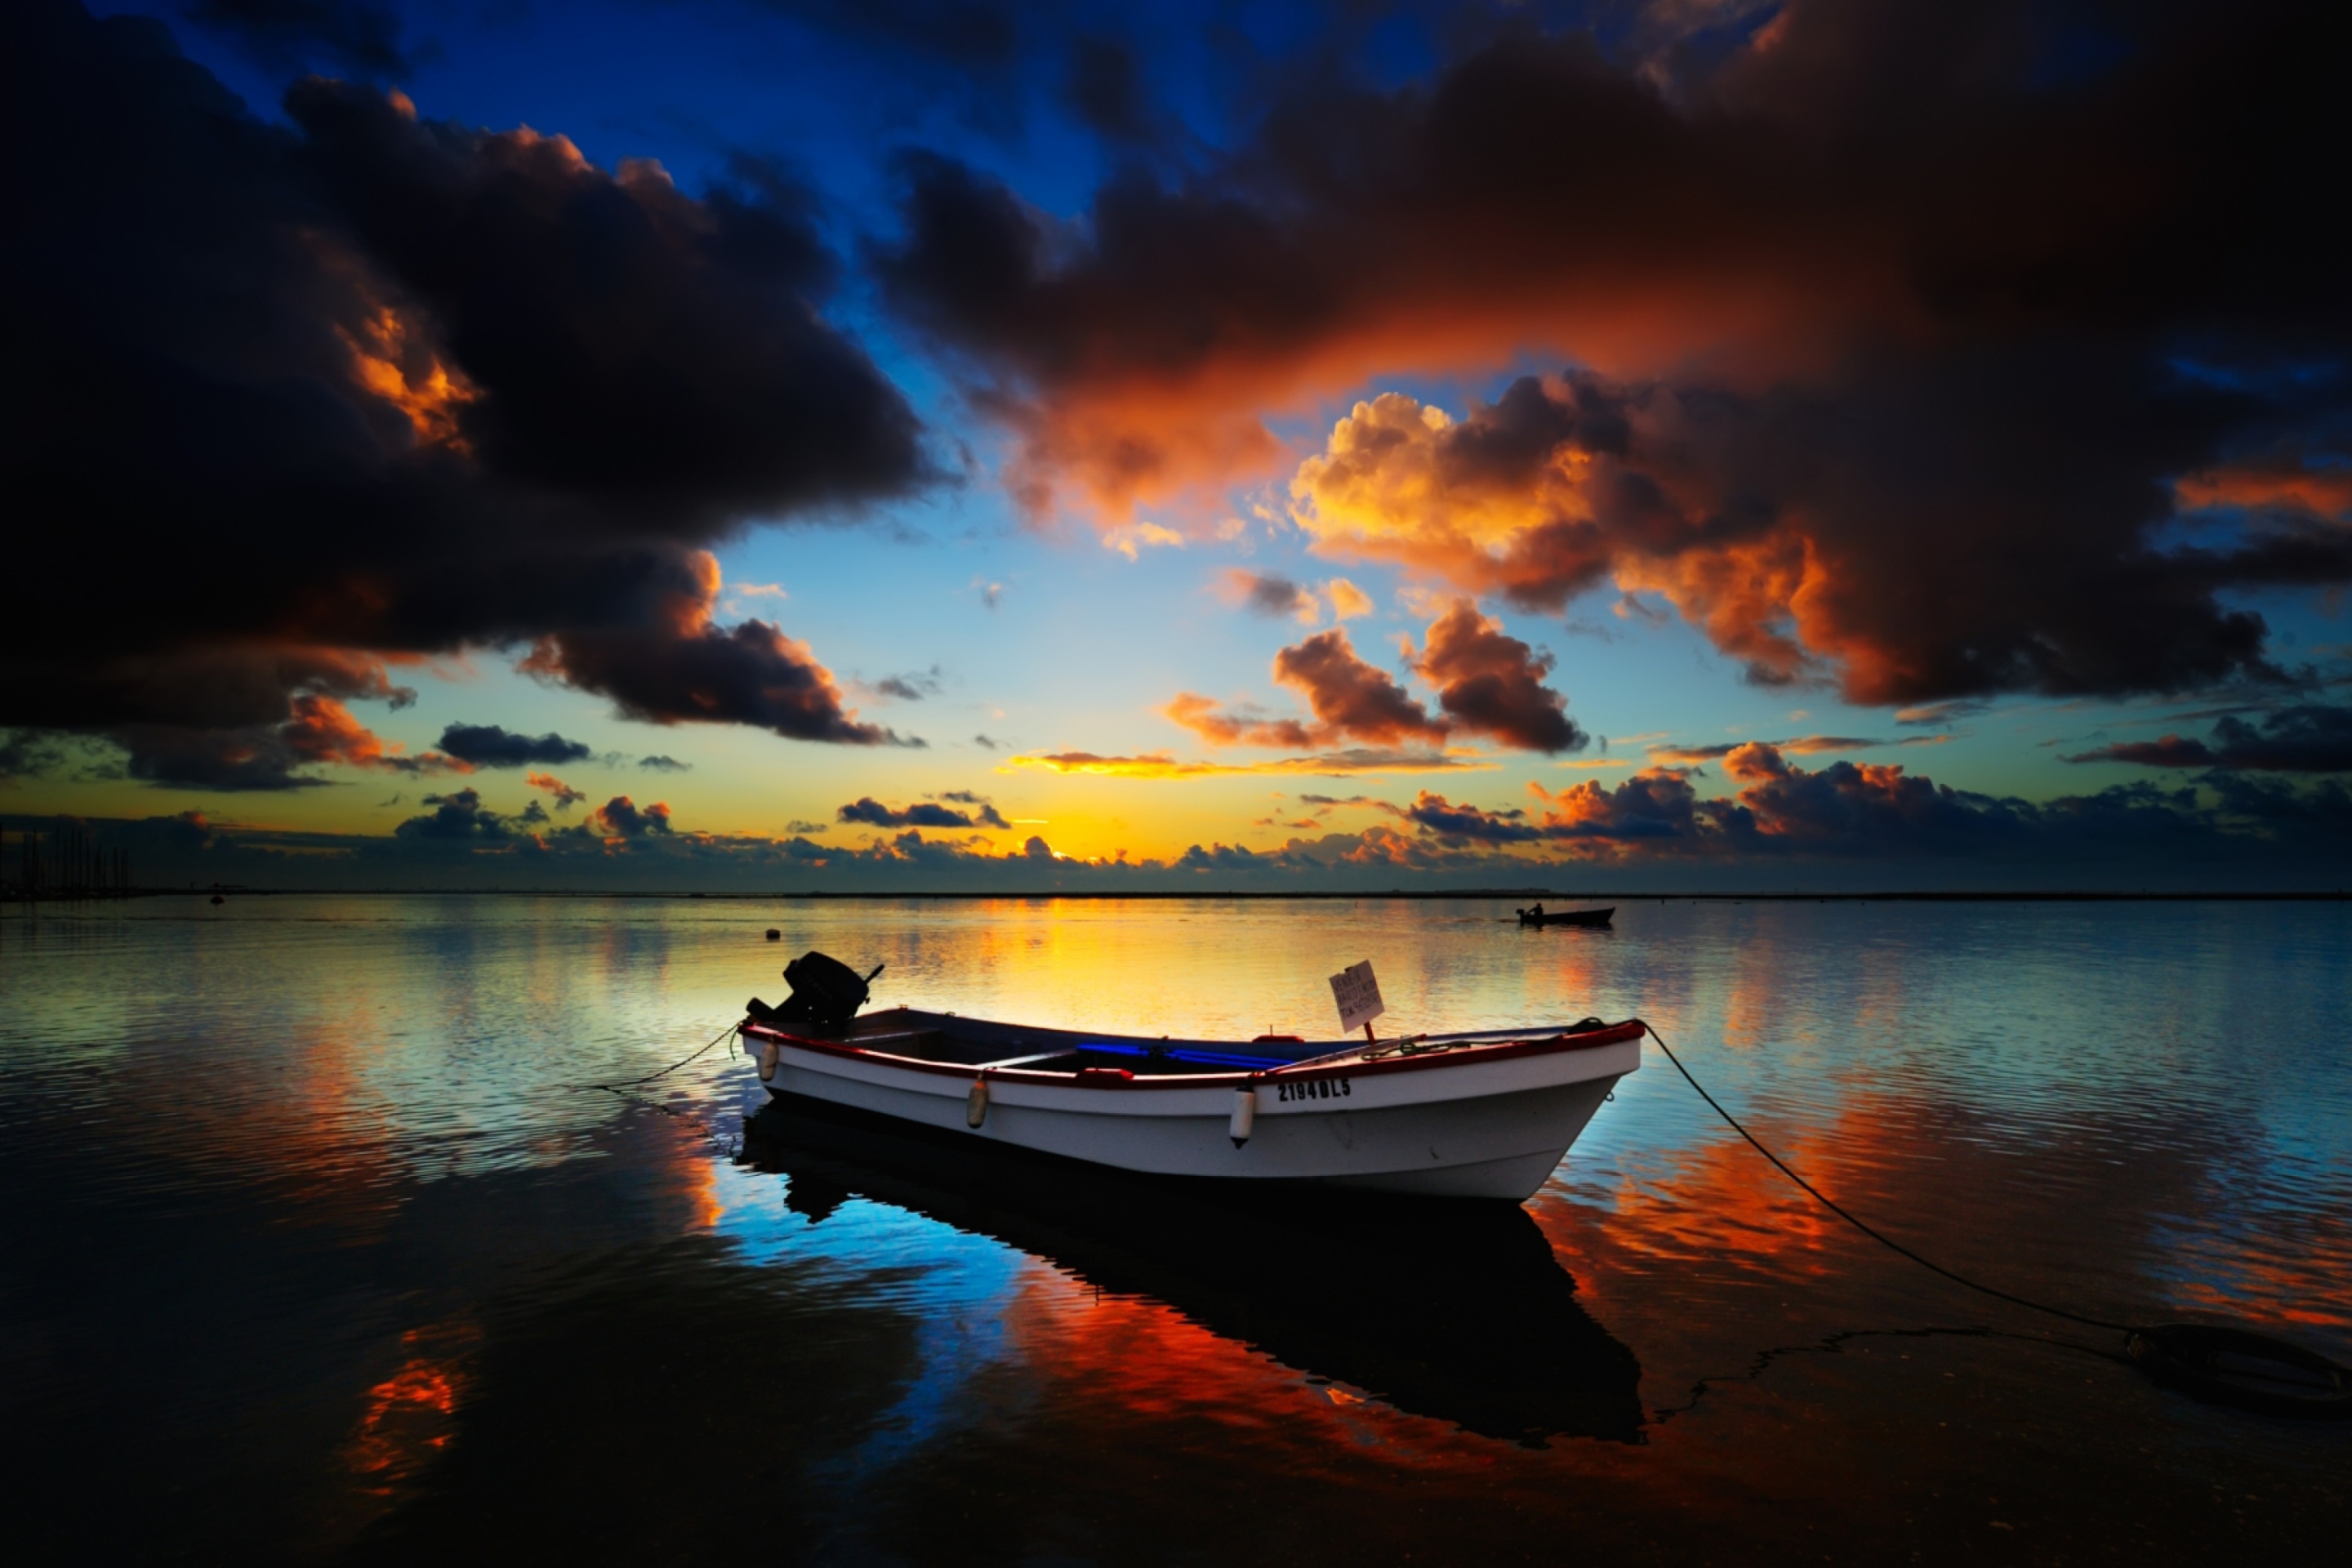 Das Boat In Sea At Sunset Wallpaper 2880x1920